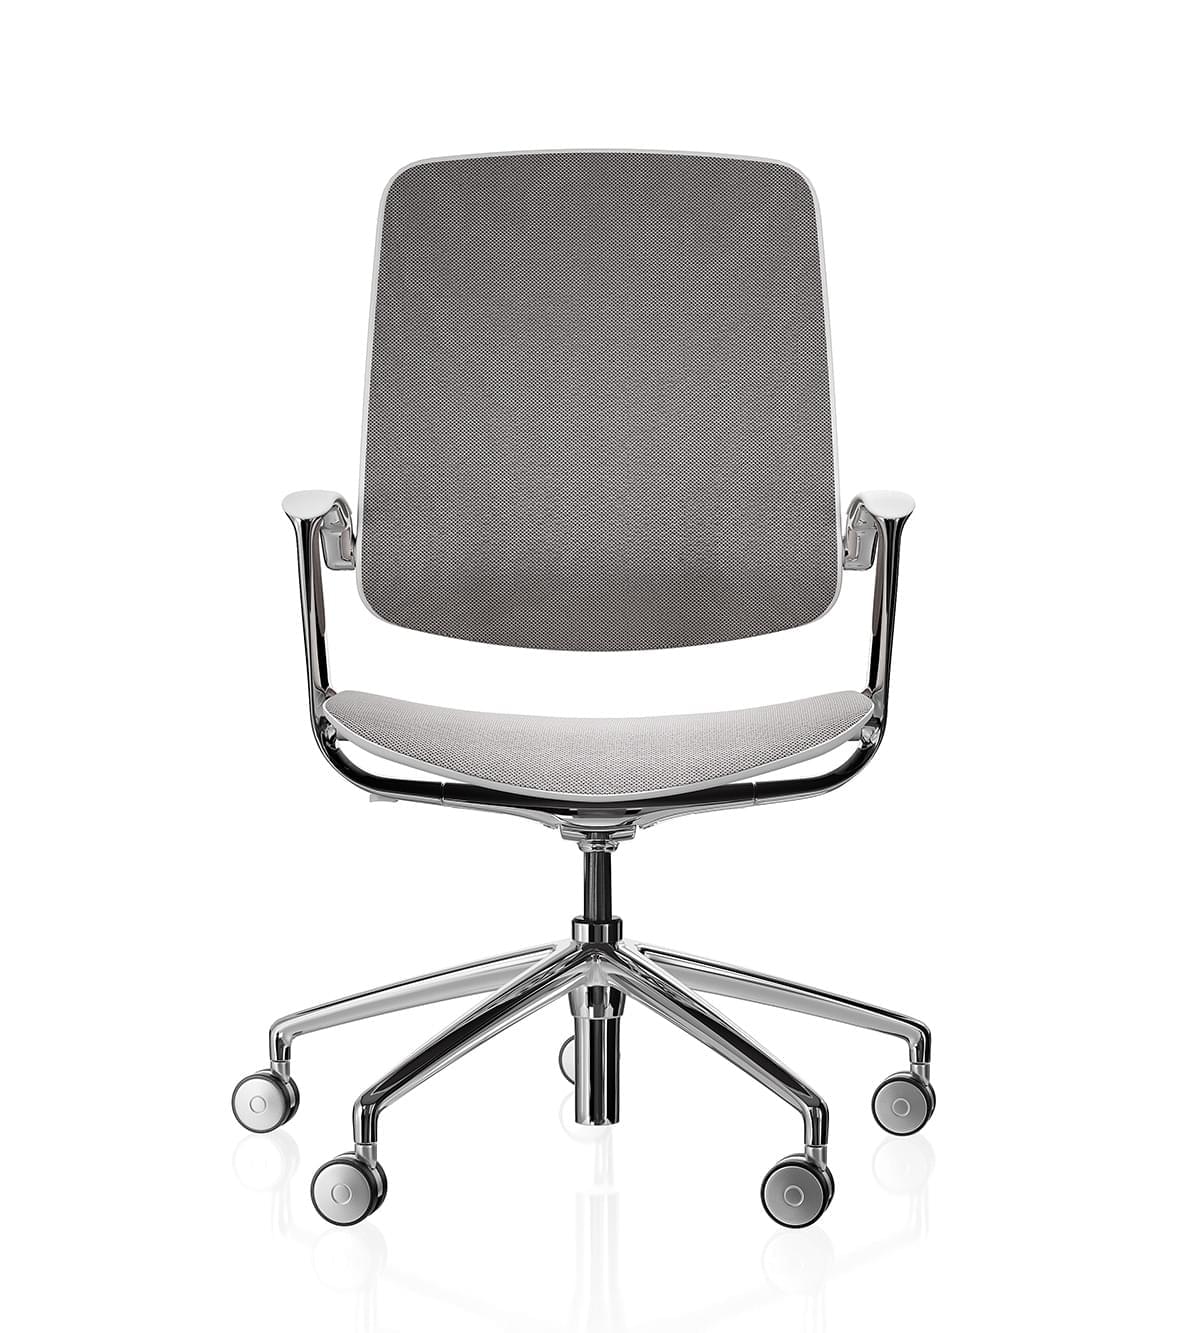 Trinetic Mesh Chair - White frame polished 5 star base with castors front